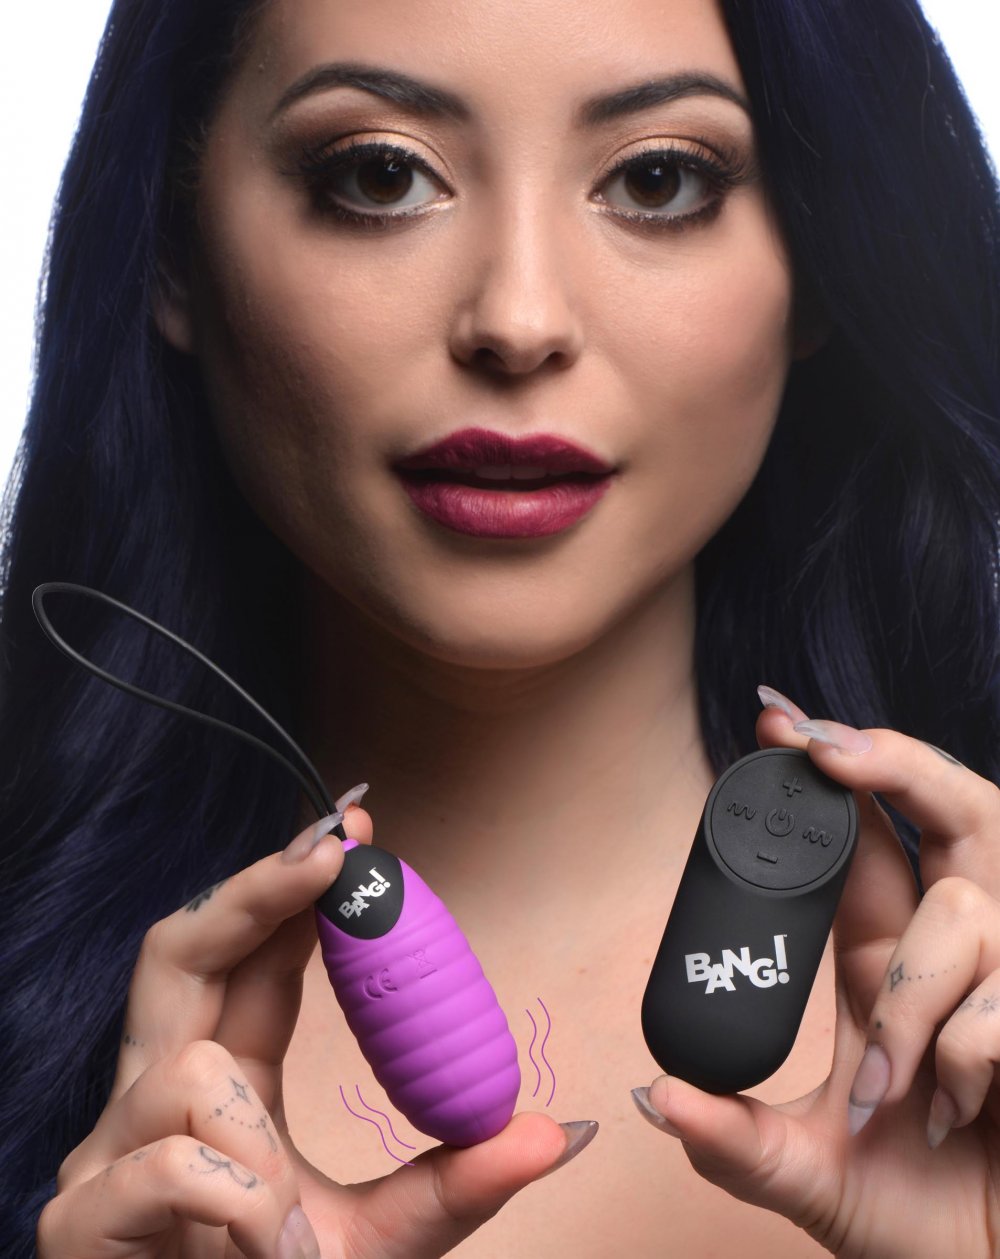 Bang%21+28X+Ribbed+Rechargeable+Silicone+Egg+with+Remote+Control